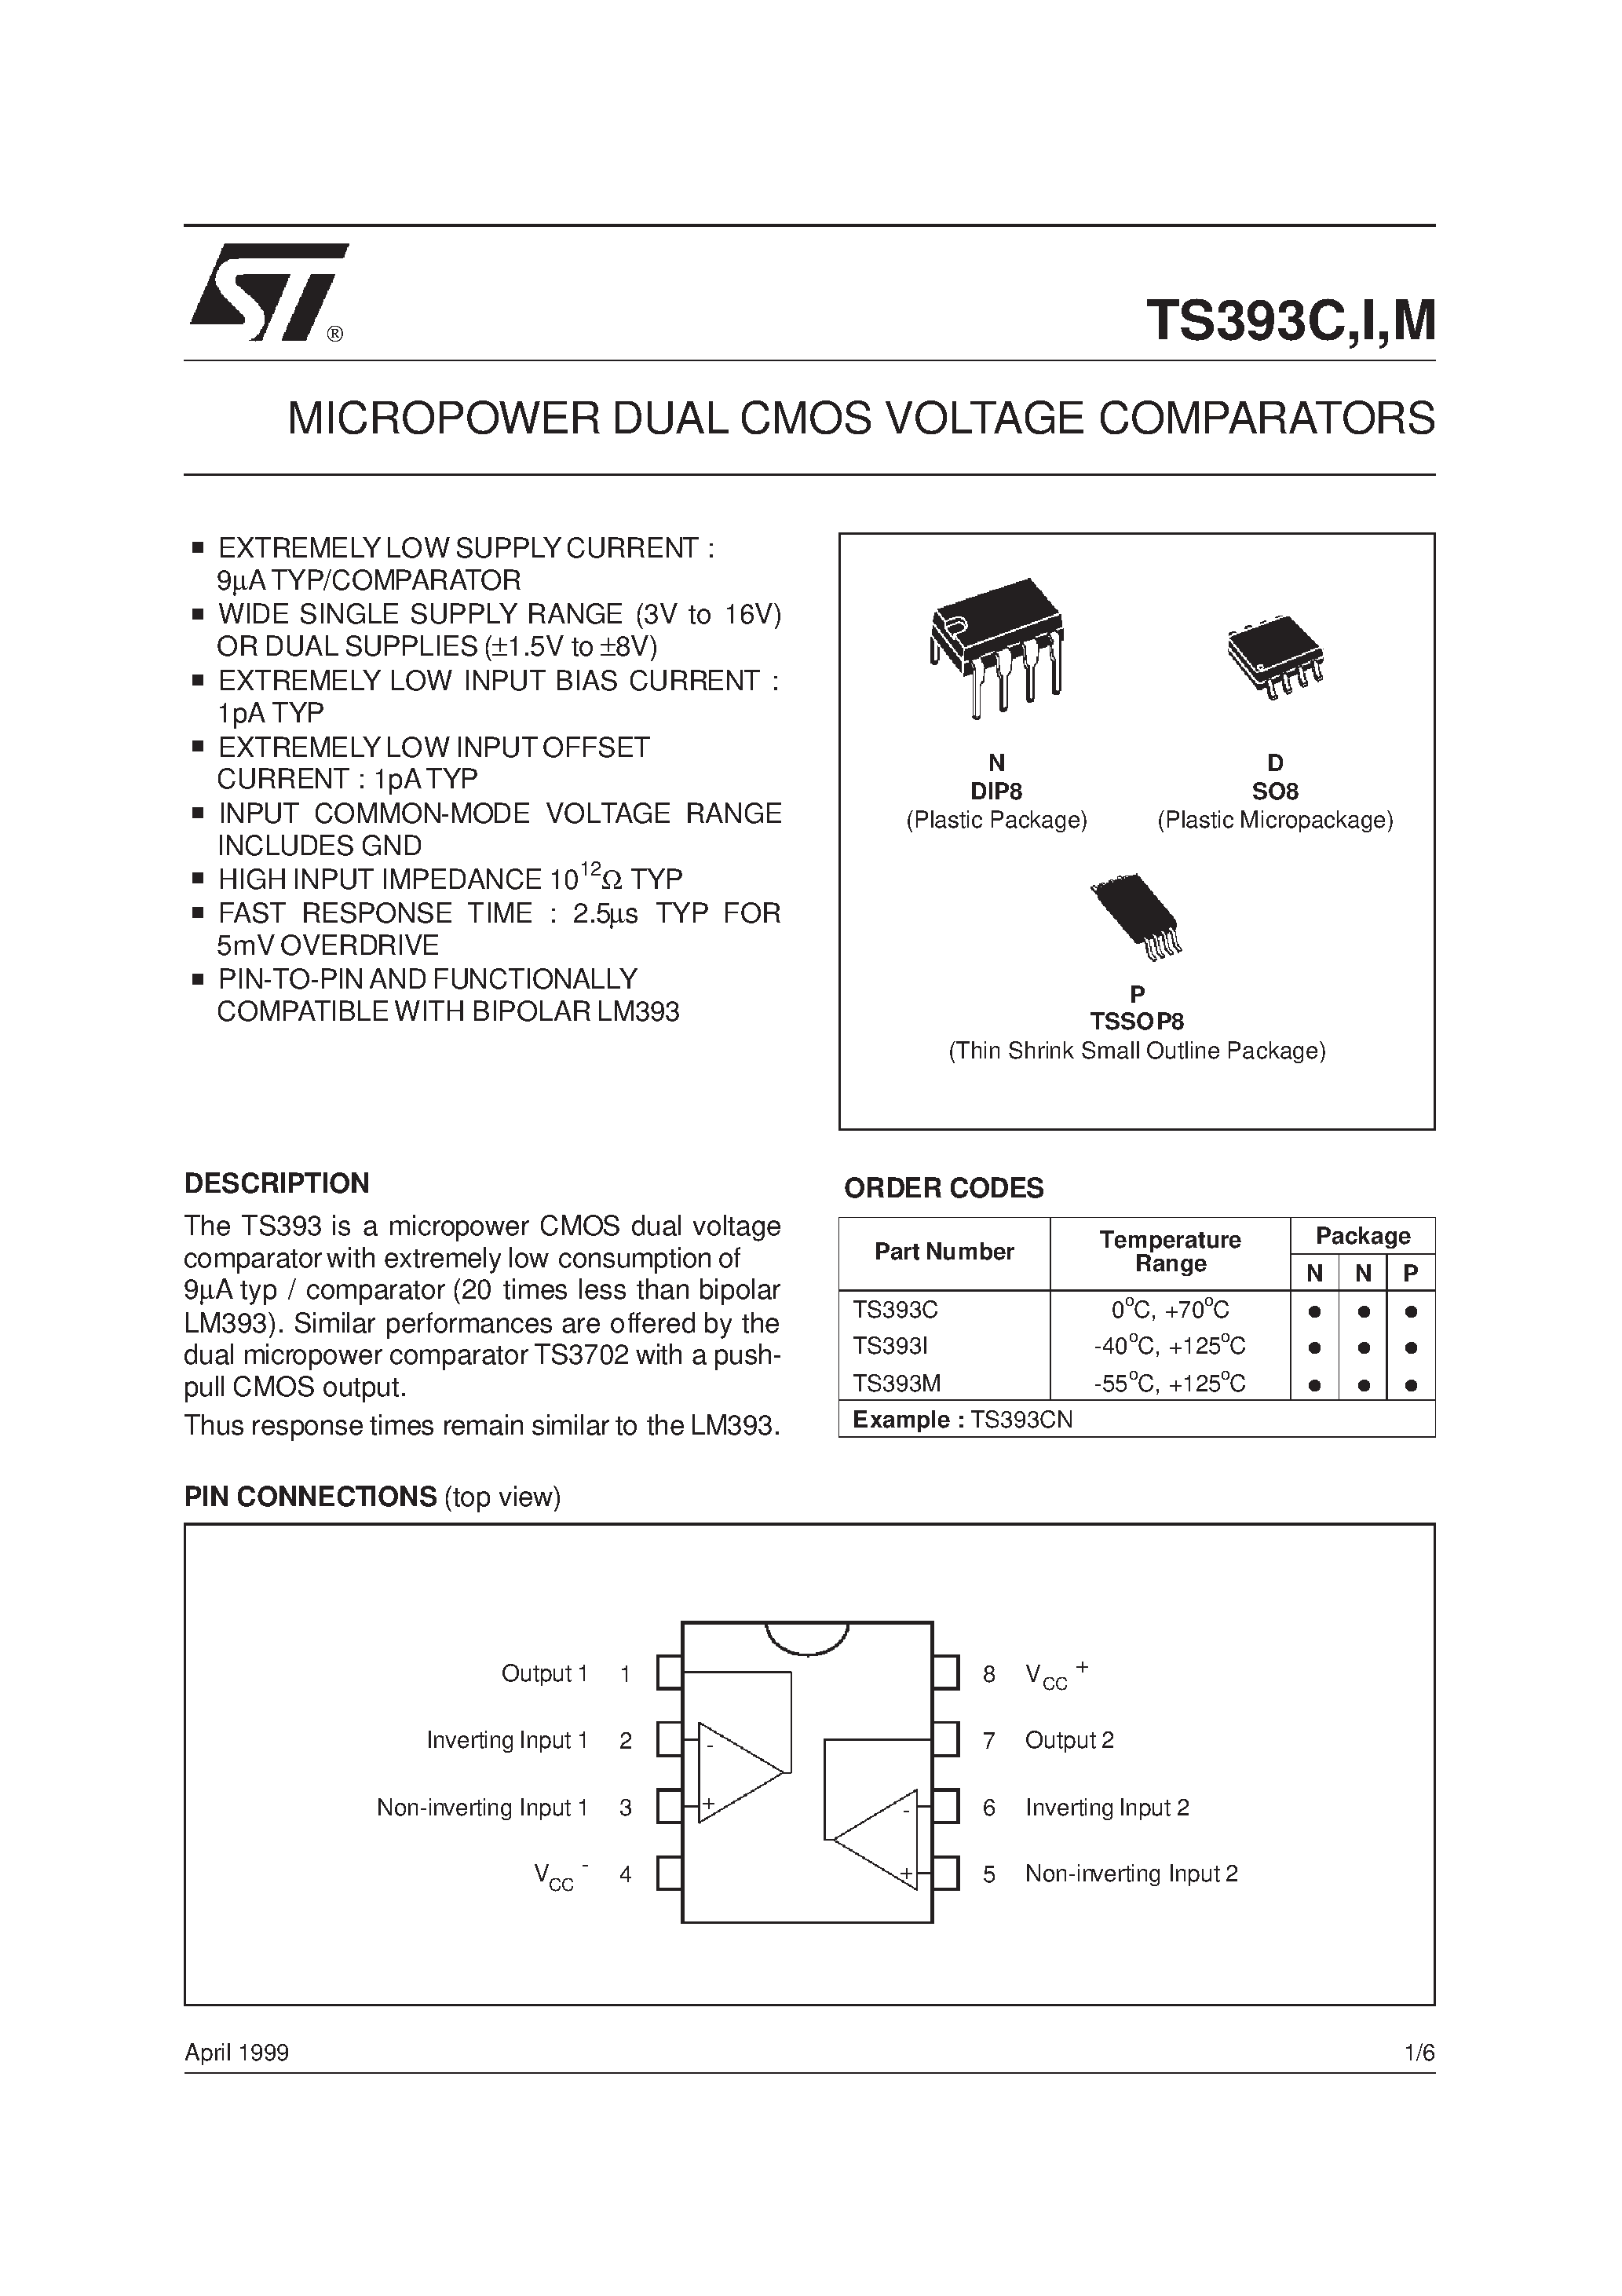 Datasheet TS393M - MICROPOWER DUAL CMOS VOLTAGE COMPARATORS page 1